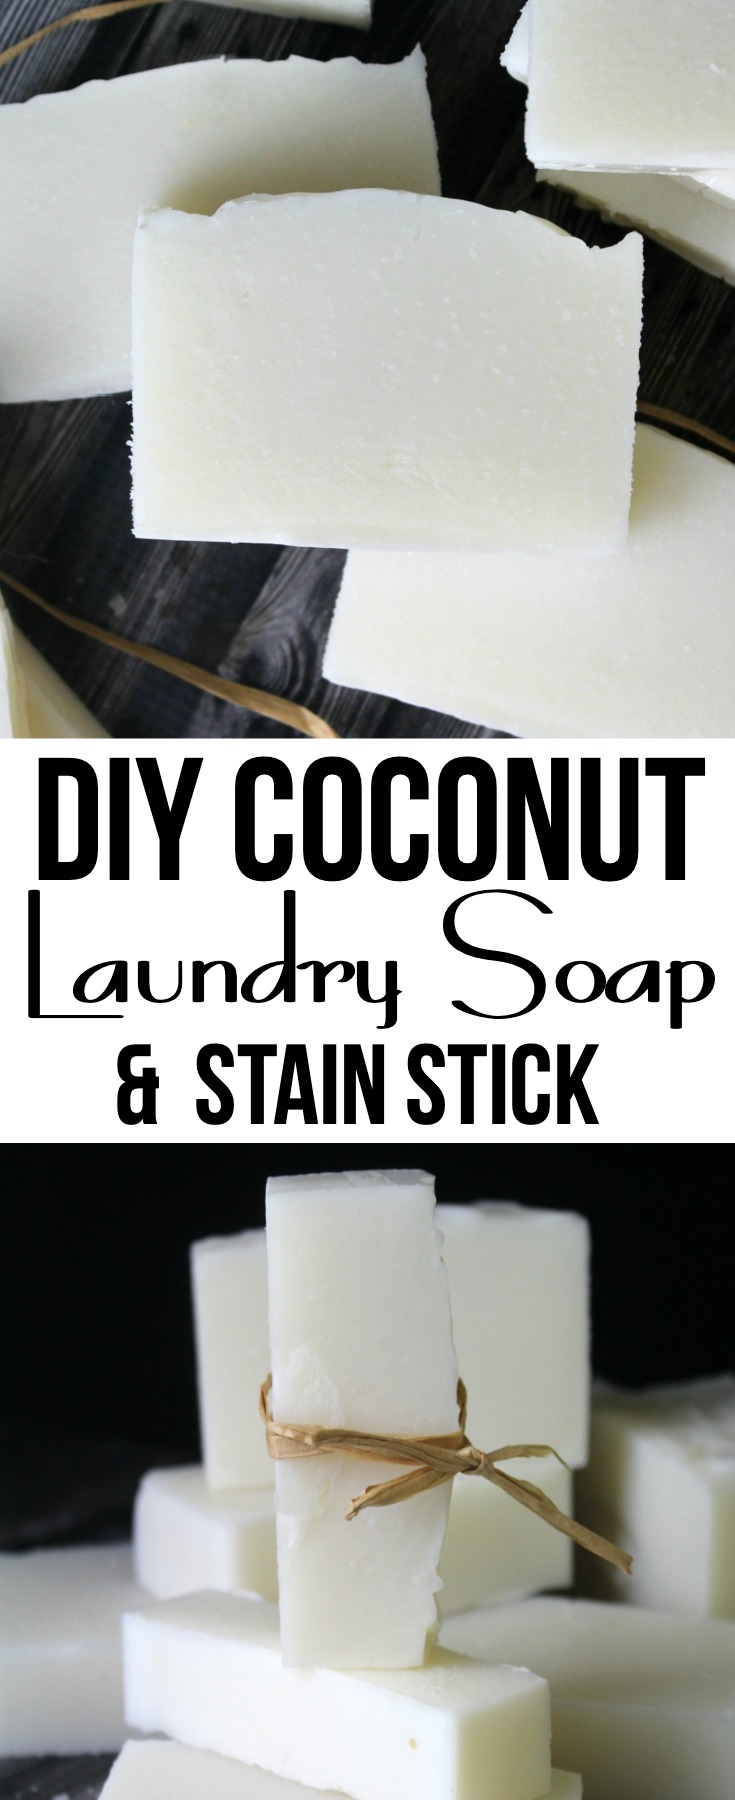 Follow these easy directions to make your  own coconut oil soap and stain stick for washing laundry, stain removal and simple household cleaning. #stainstick #DIY #laundry #handmade #cleaning